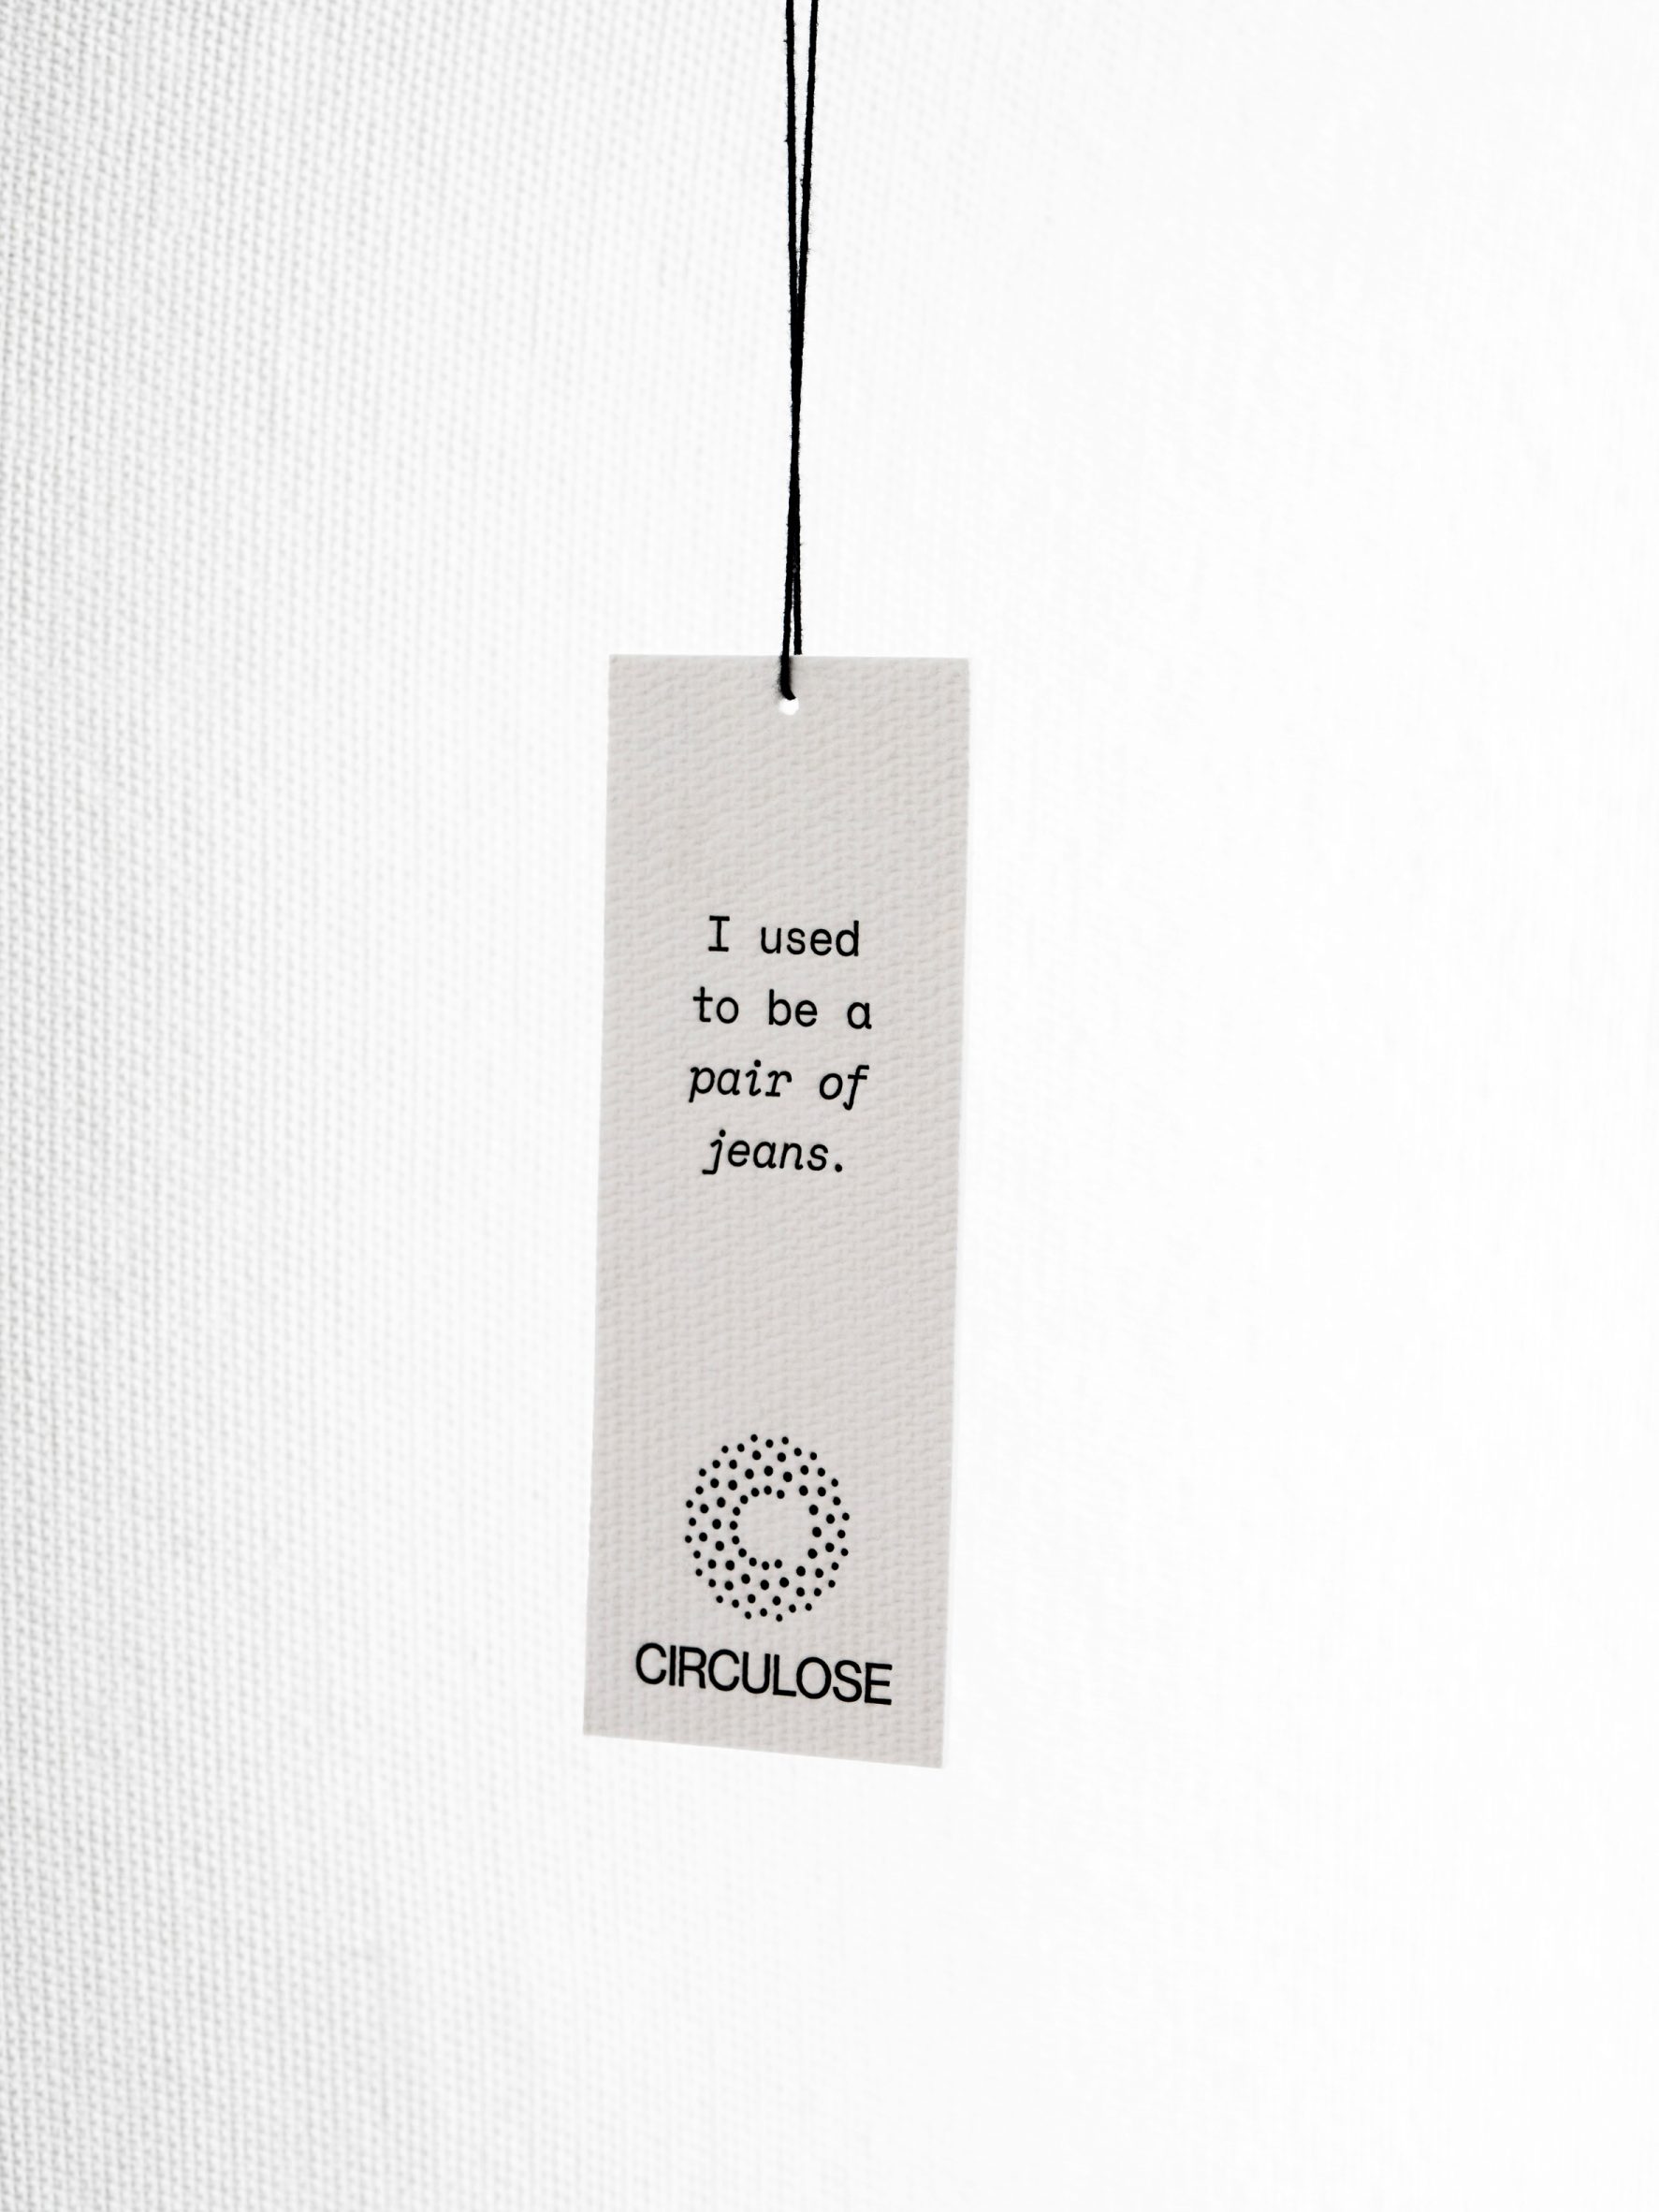 Circulose clothes tag reading "I used to be a pair of jeans" 